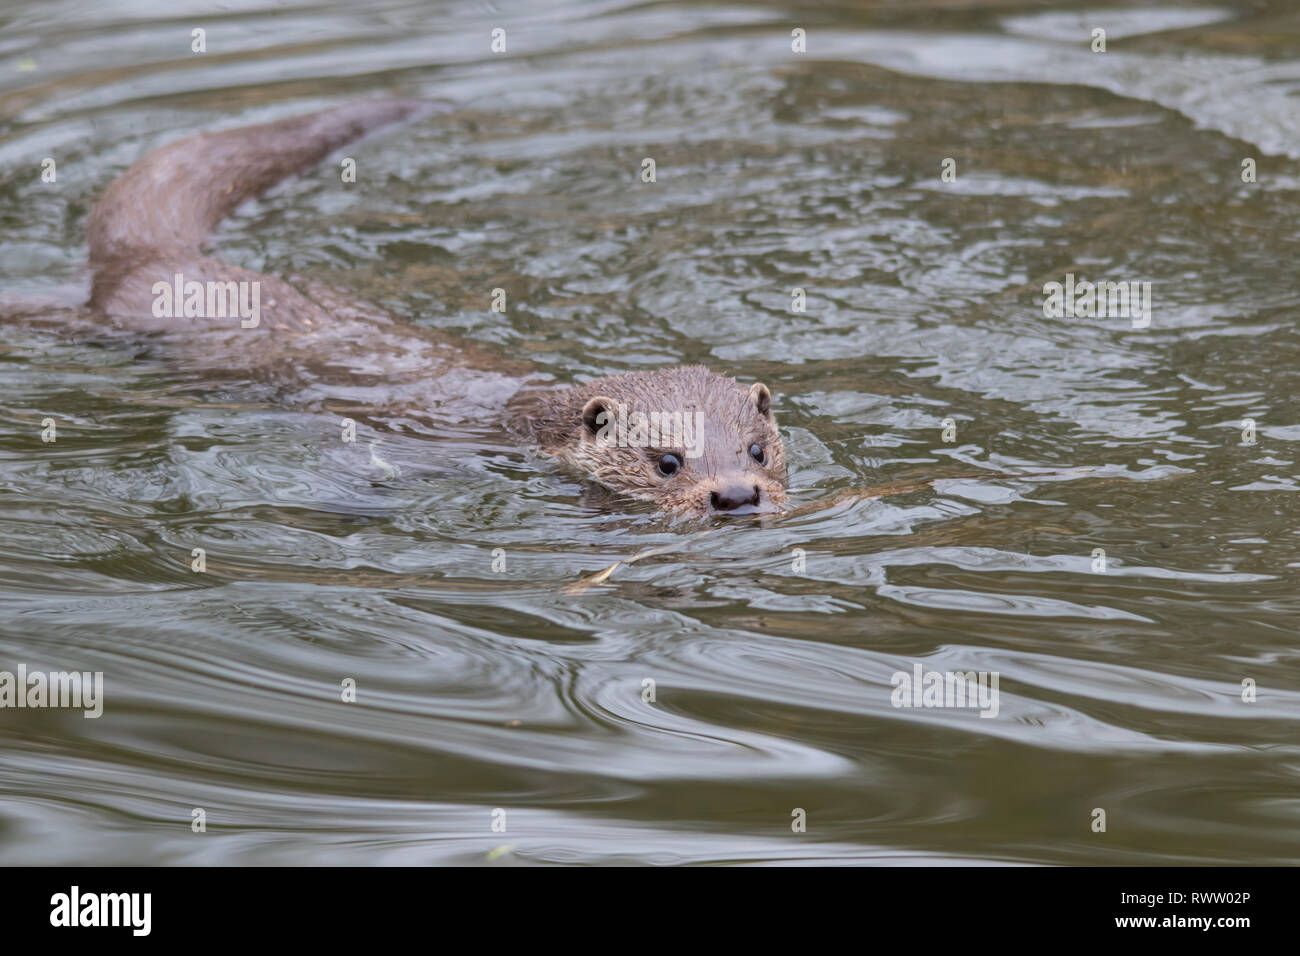 A Eurasian Otter (Lutra lutra), also known as the European Otter, Eurasian River Otter, Common Otter, and Old World Otter. Stock Photo